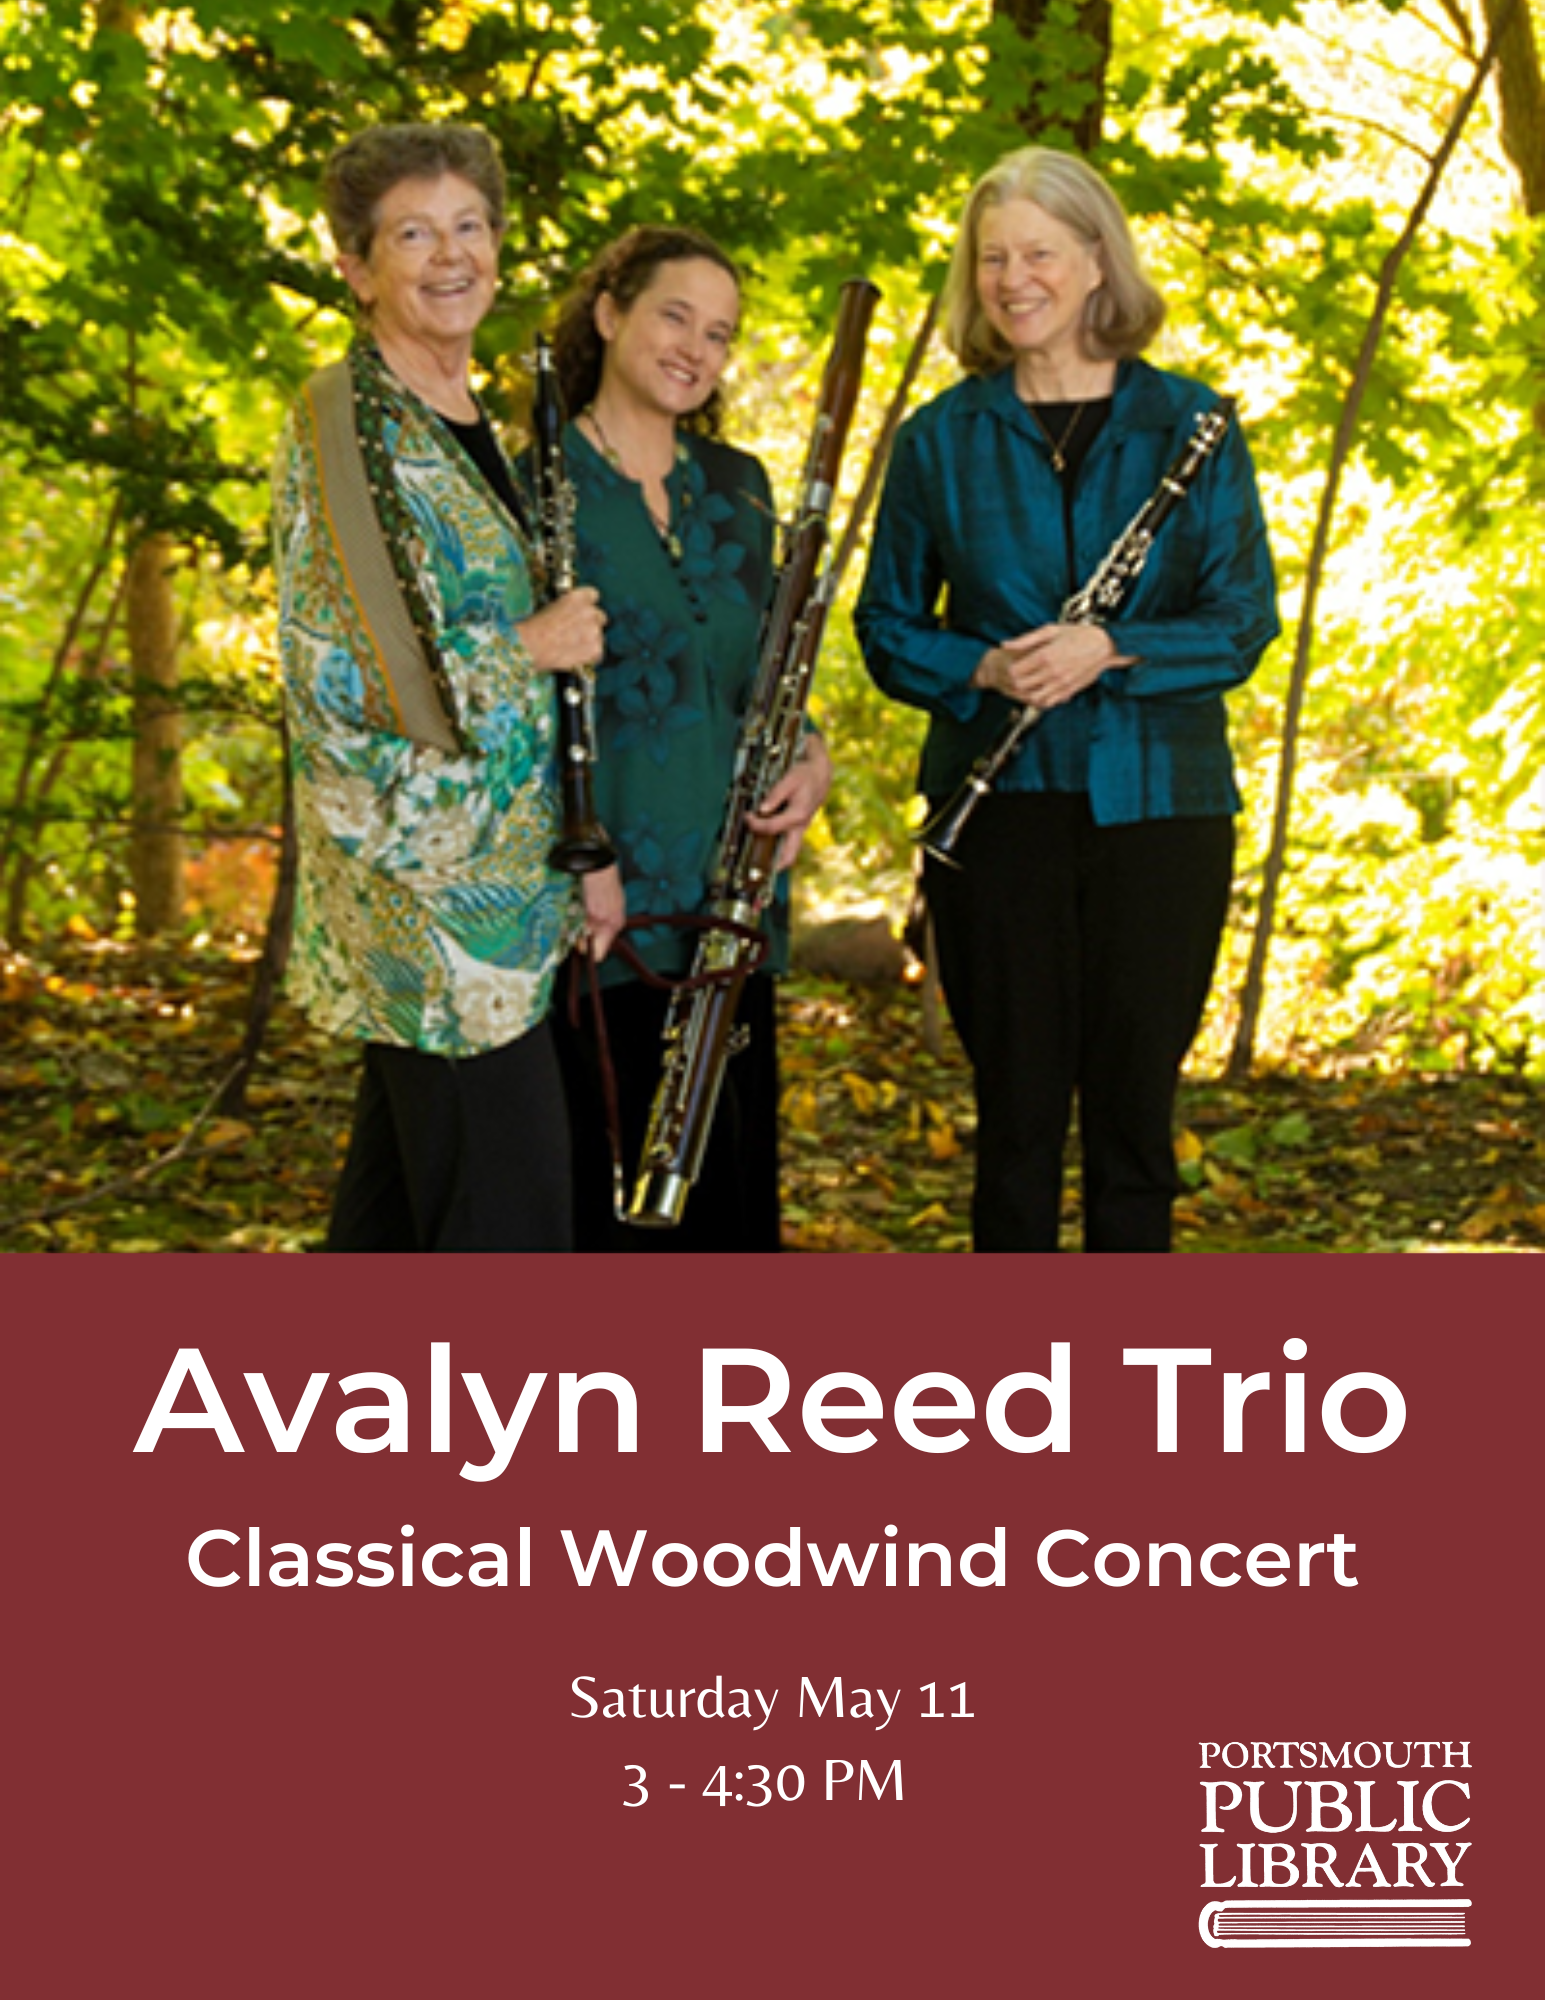 Avalyn Reed Trio Three women in forest with woodwind instruments